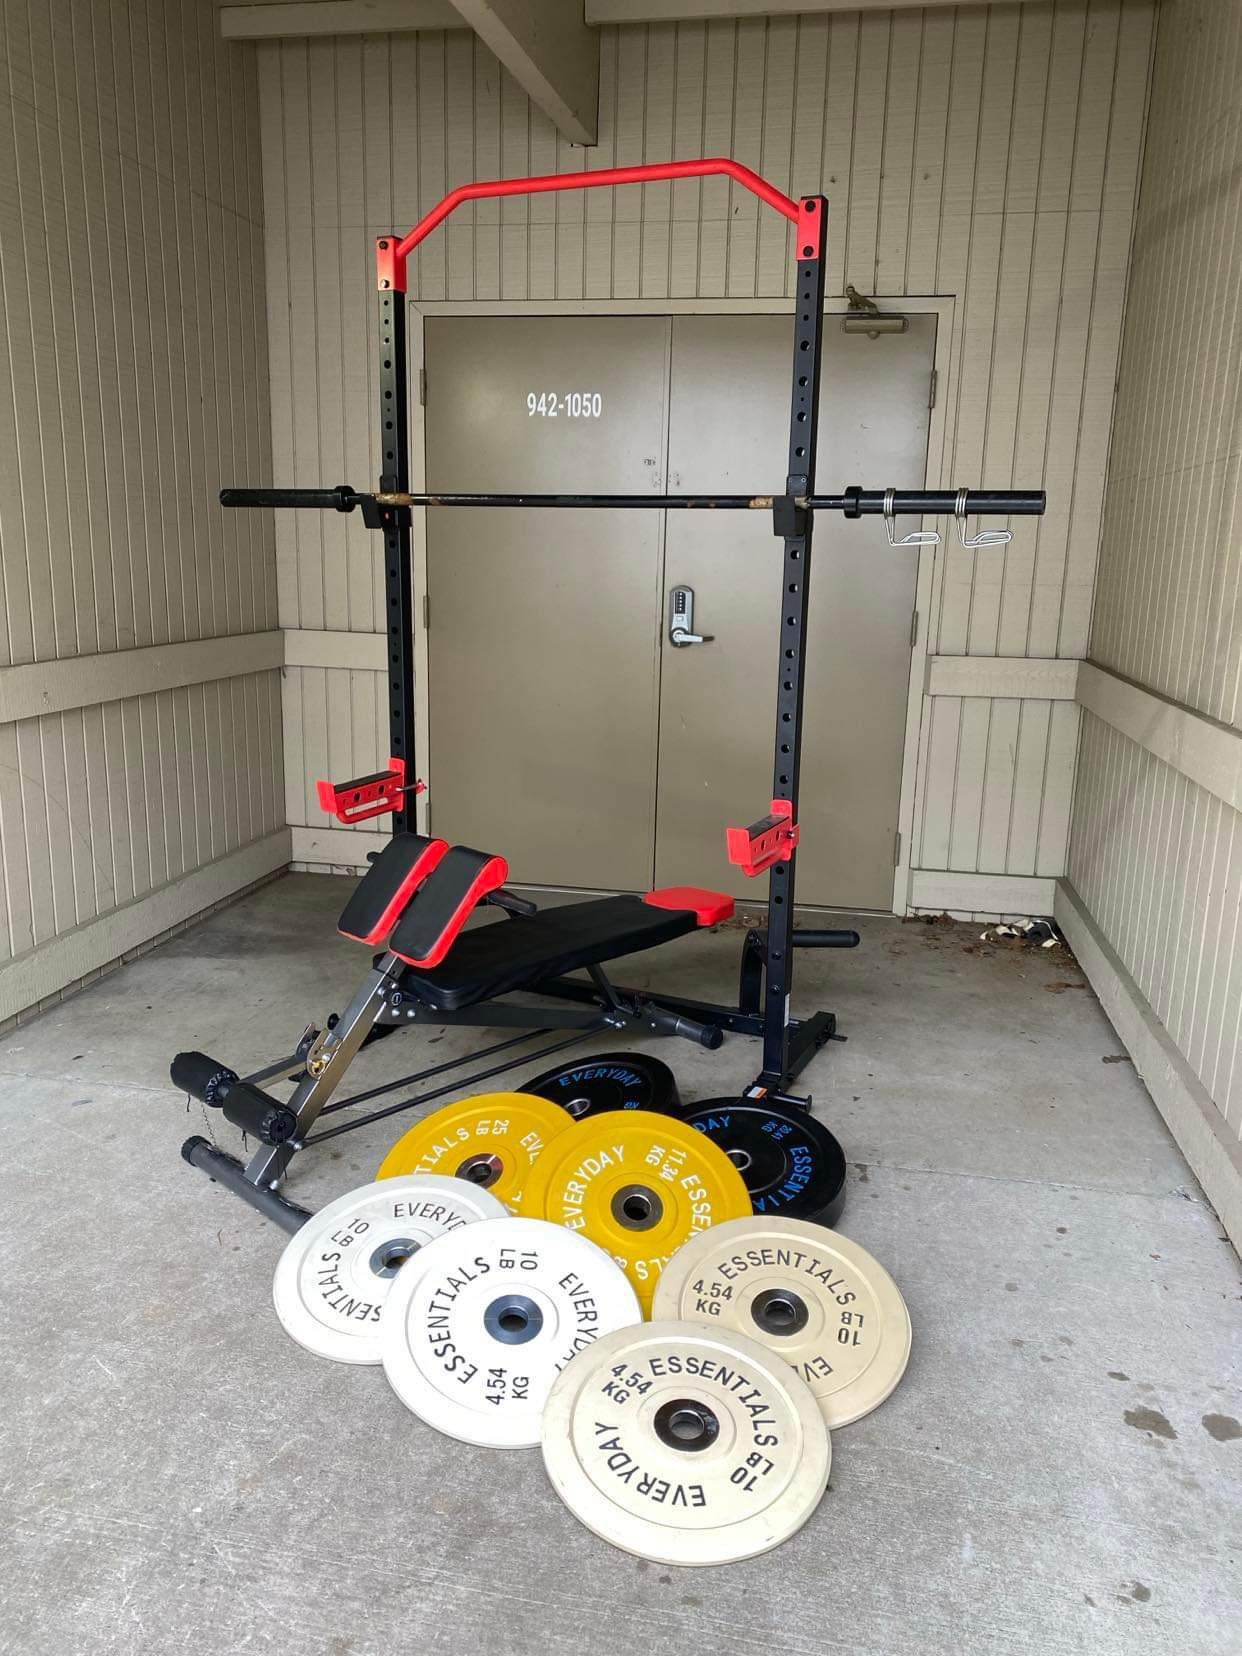 Squat Rack With Barbell Bumper Weights Bench 